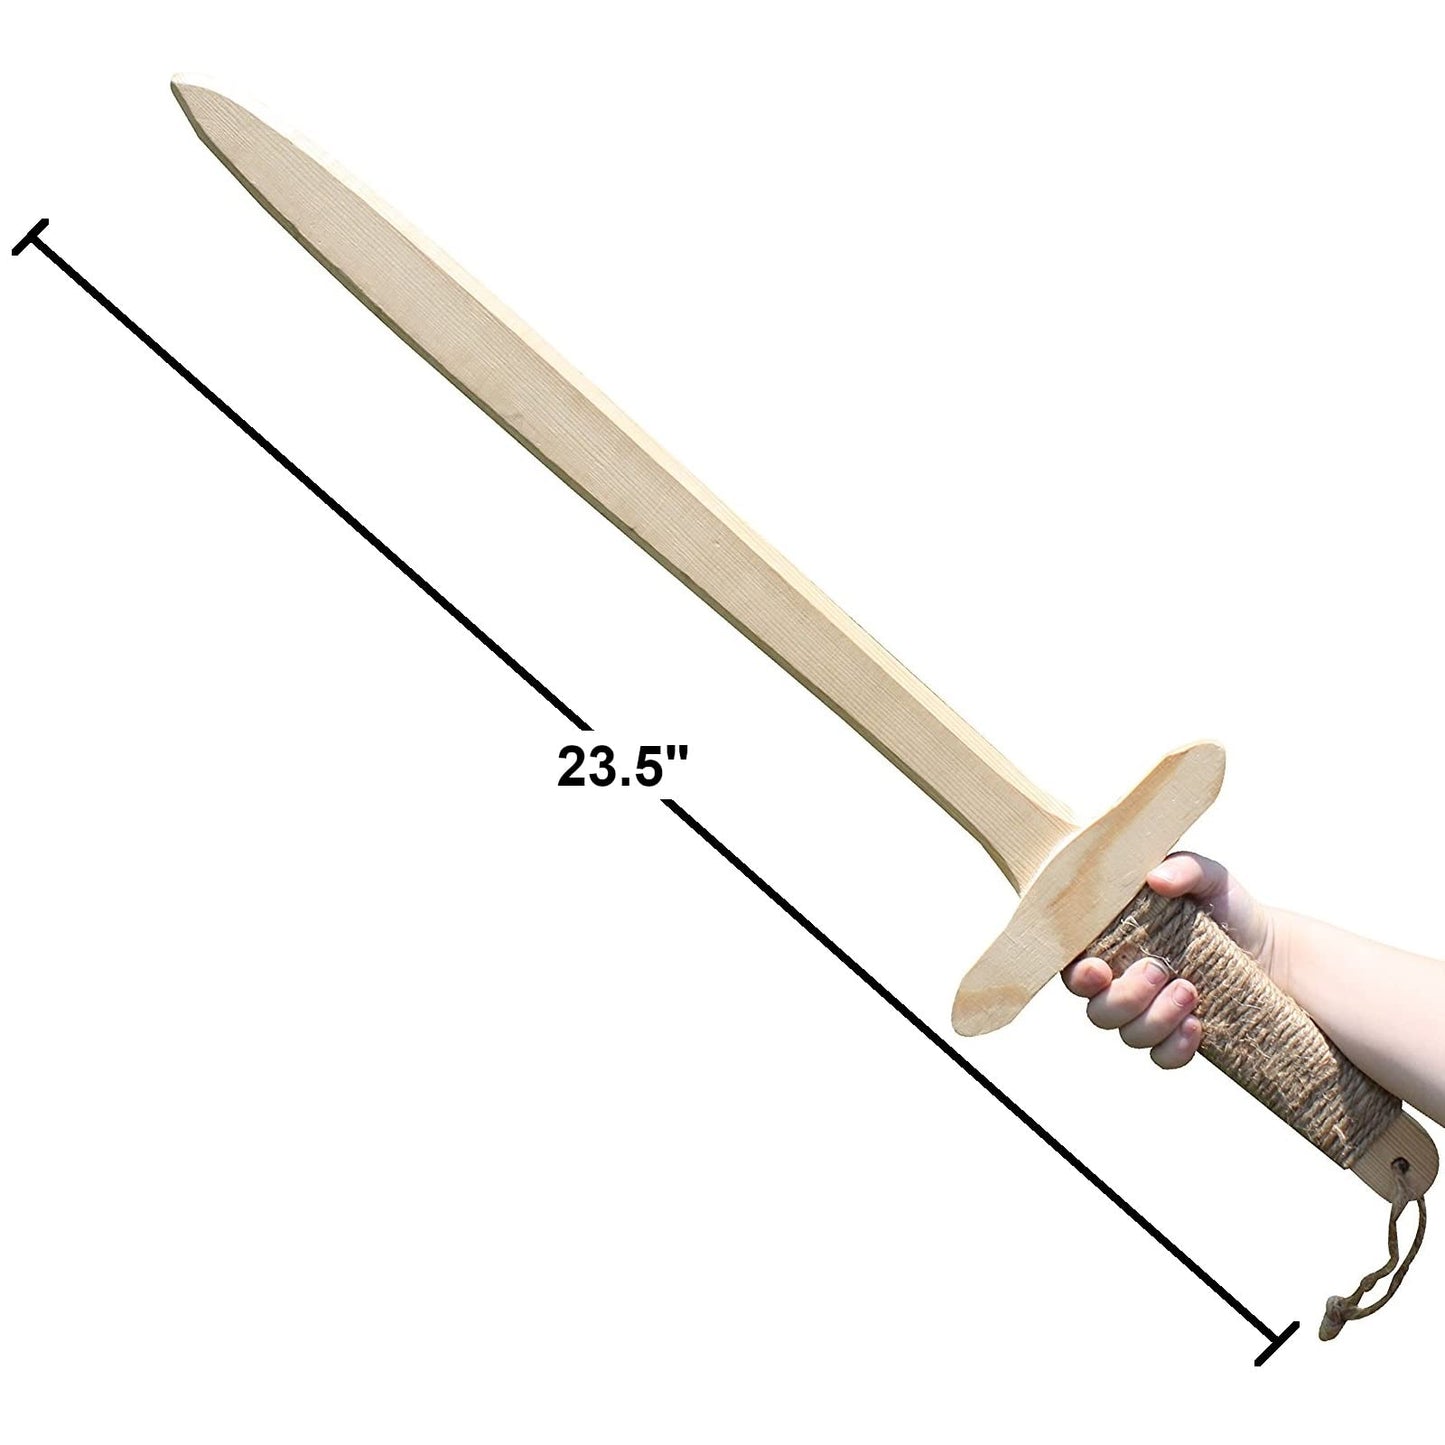 Adventure Awaits! Wooden Toy Sword for Kids with Jute Wrapped Handle | 2 Pack | Lightweight and Durable for Imaginative Kids | Set of 2